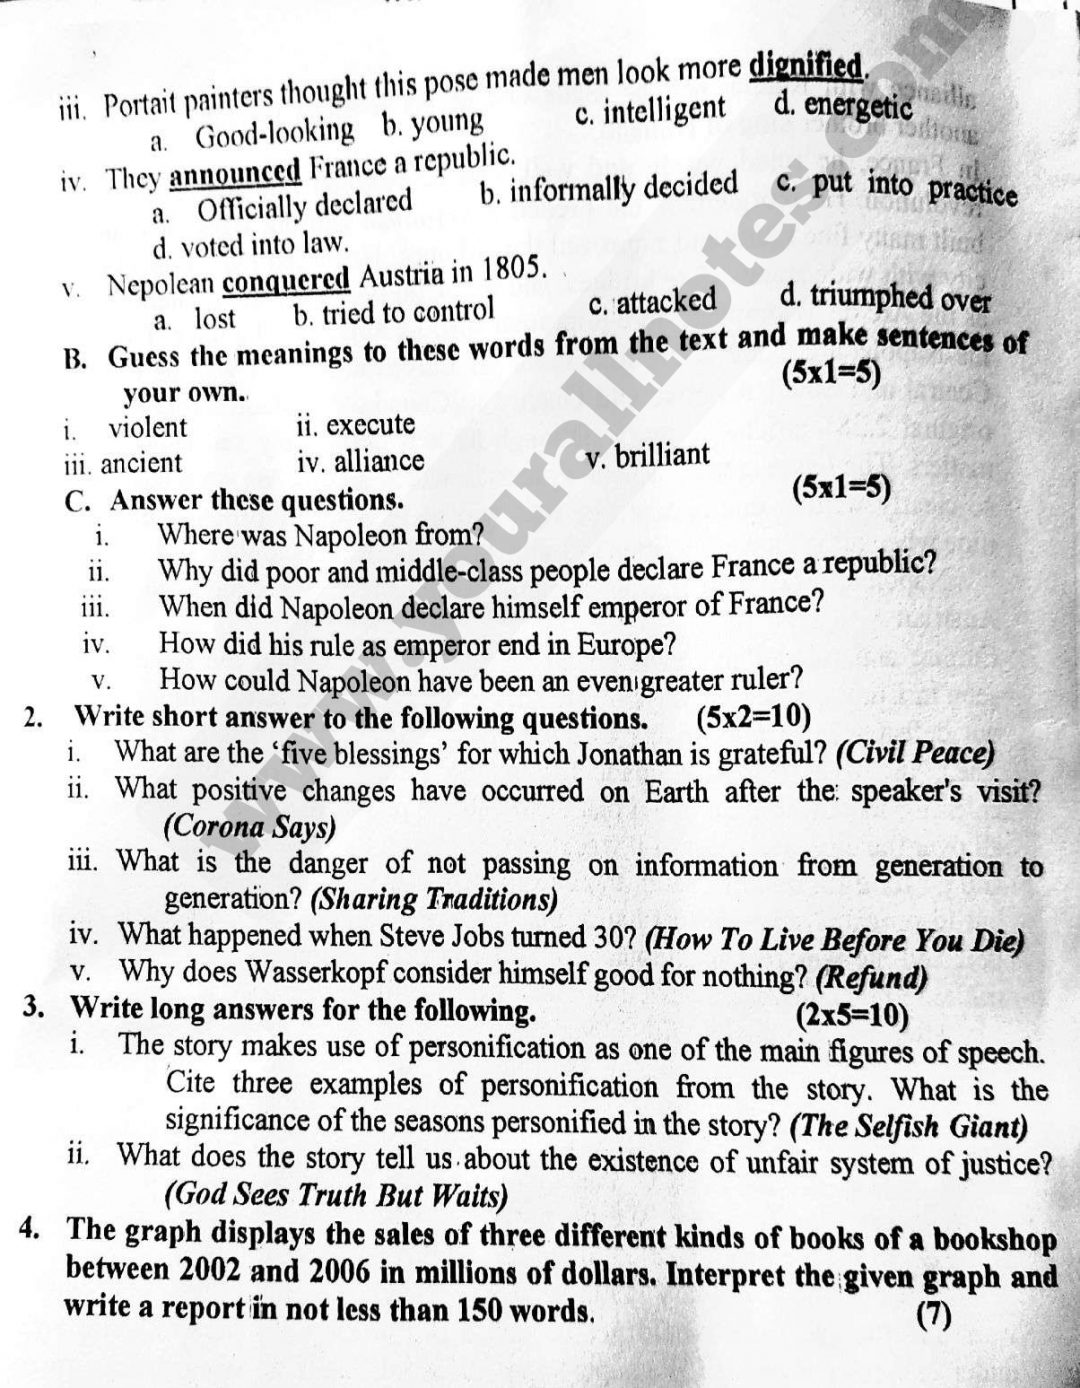 11th english question paper pdf download